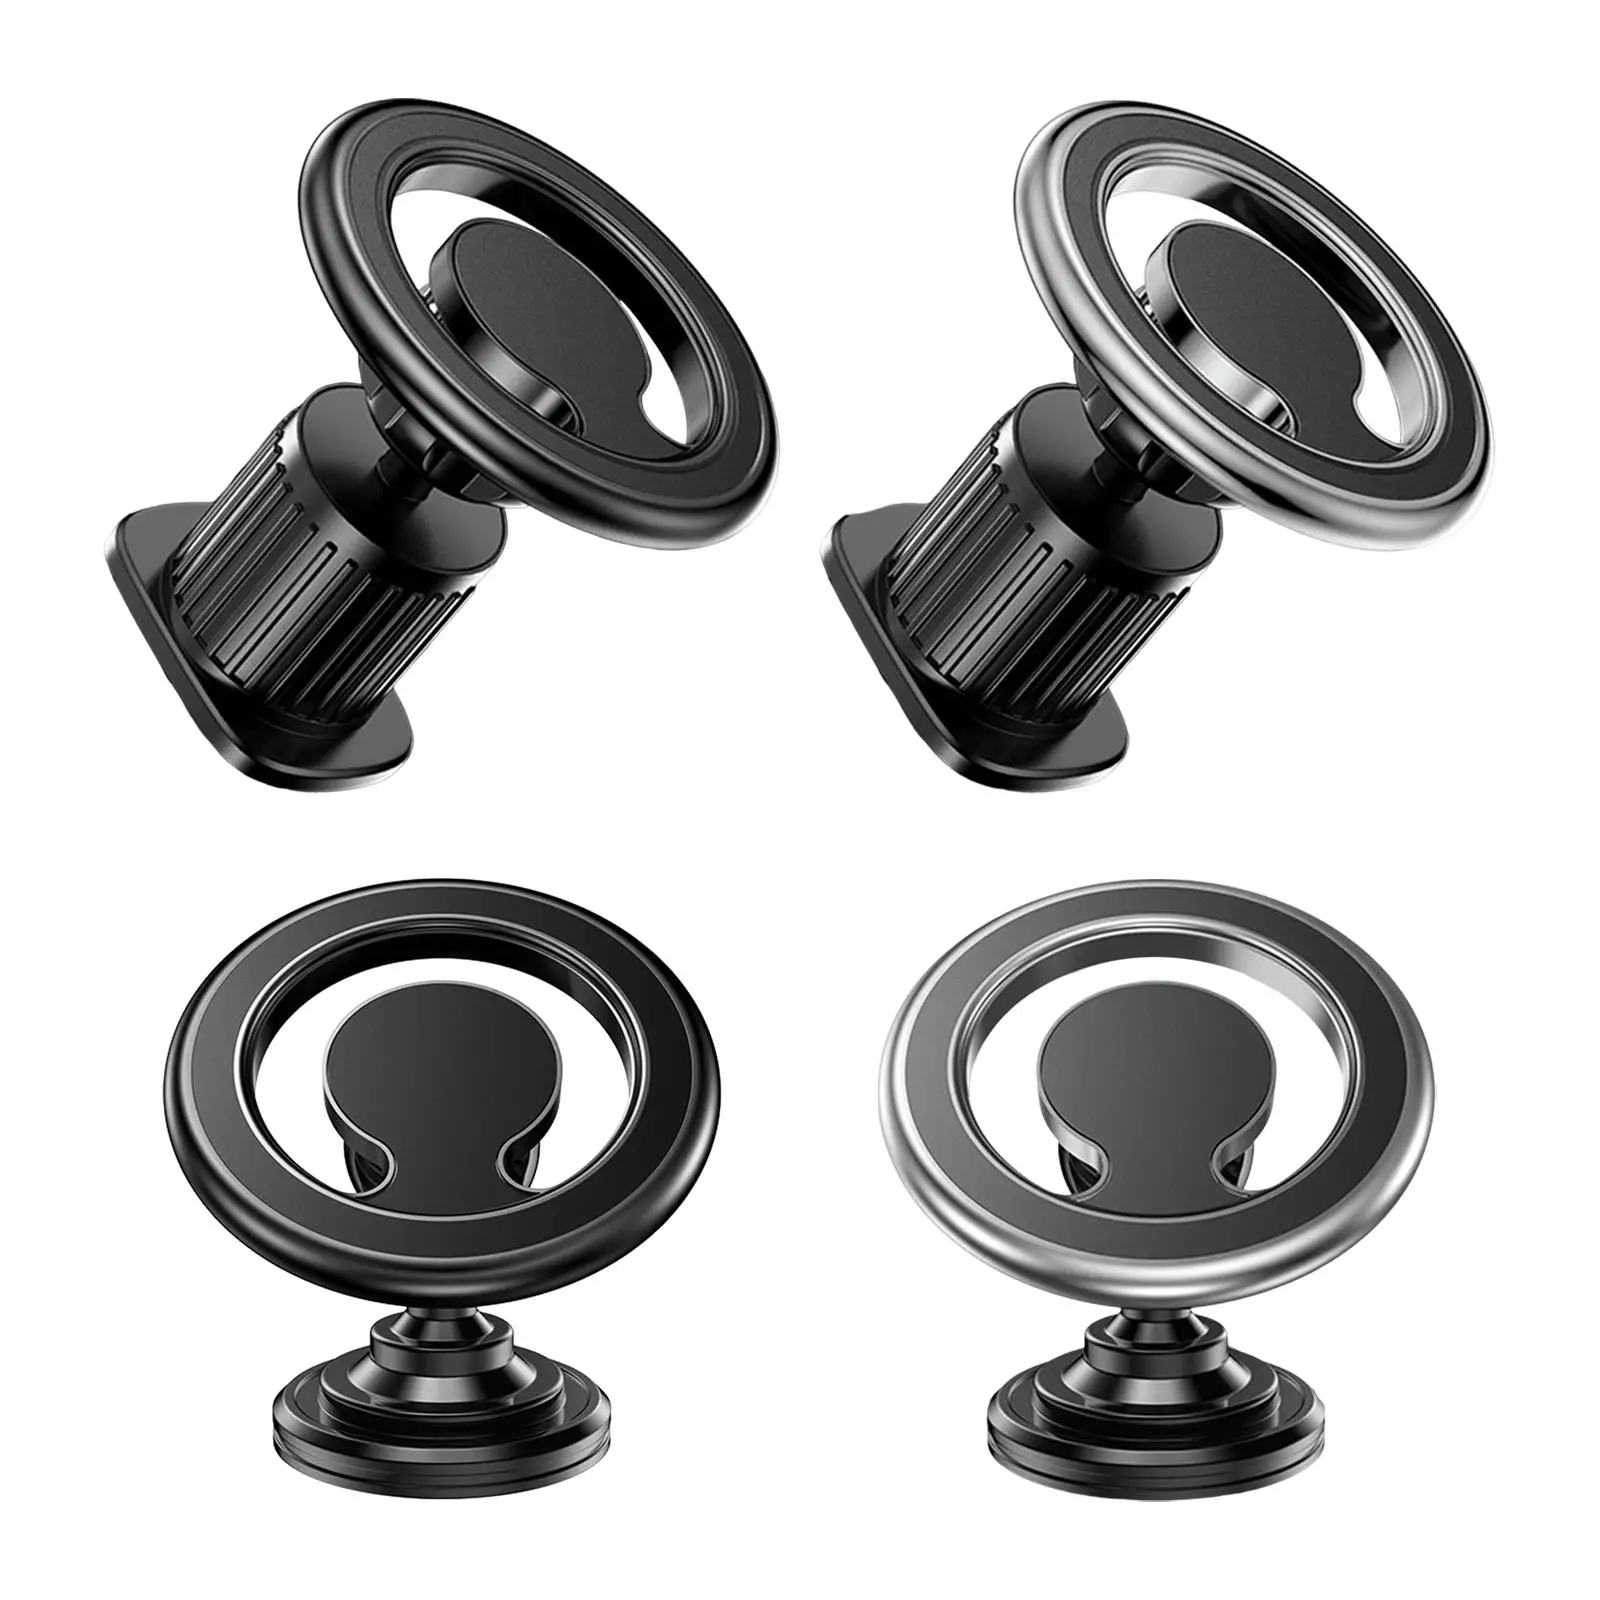 Compact Magnetic Car Phone Holder Mount 360 Degree Rotatable for Most 4.7-7.2inch Smartphones Hands Free Phone Cradle